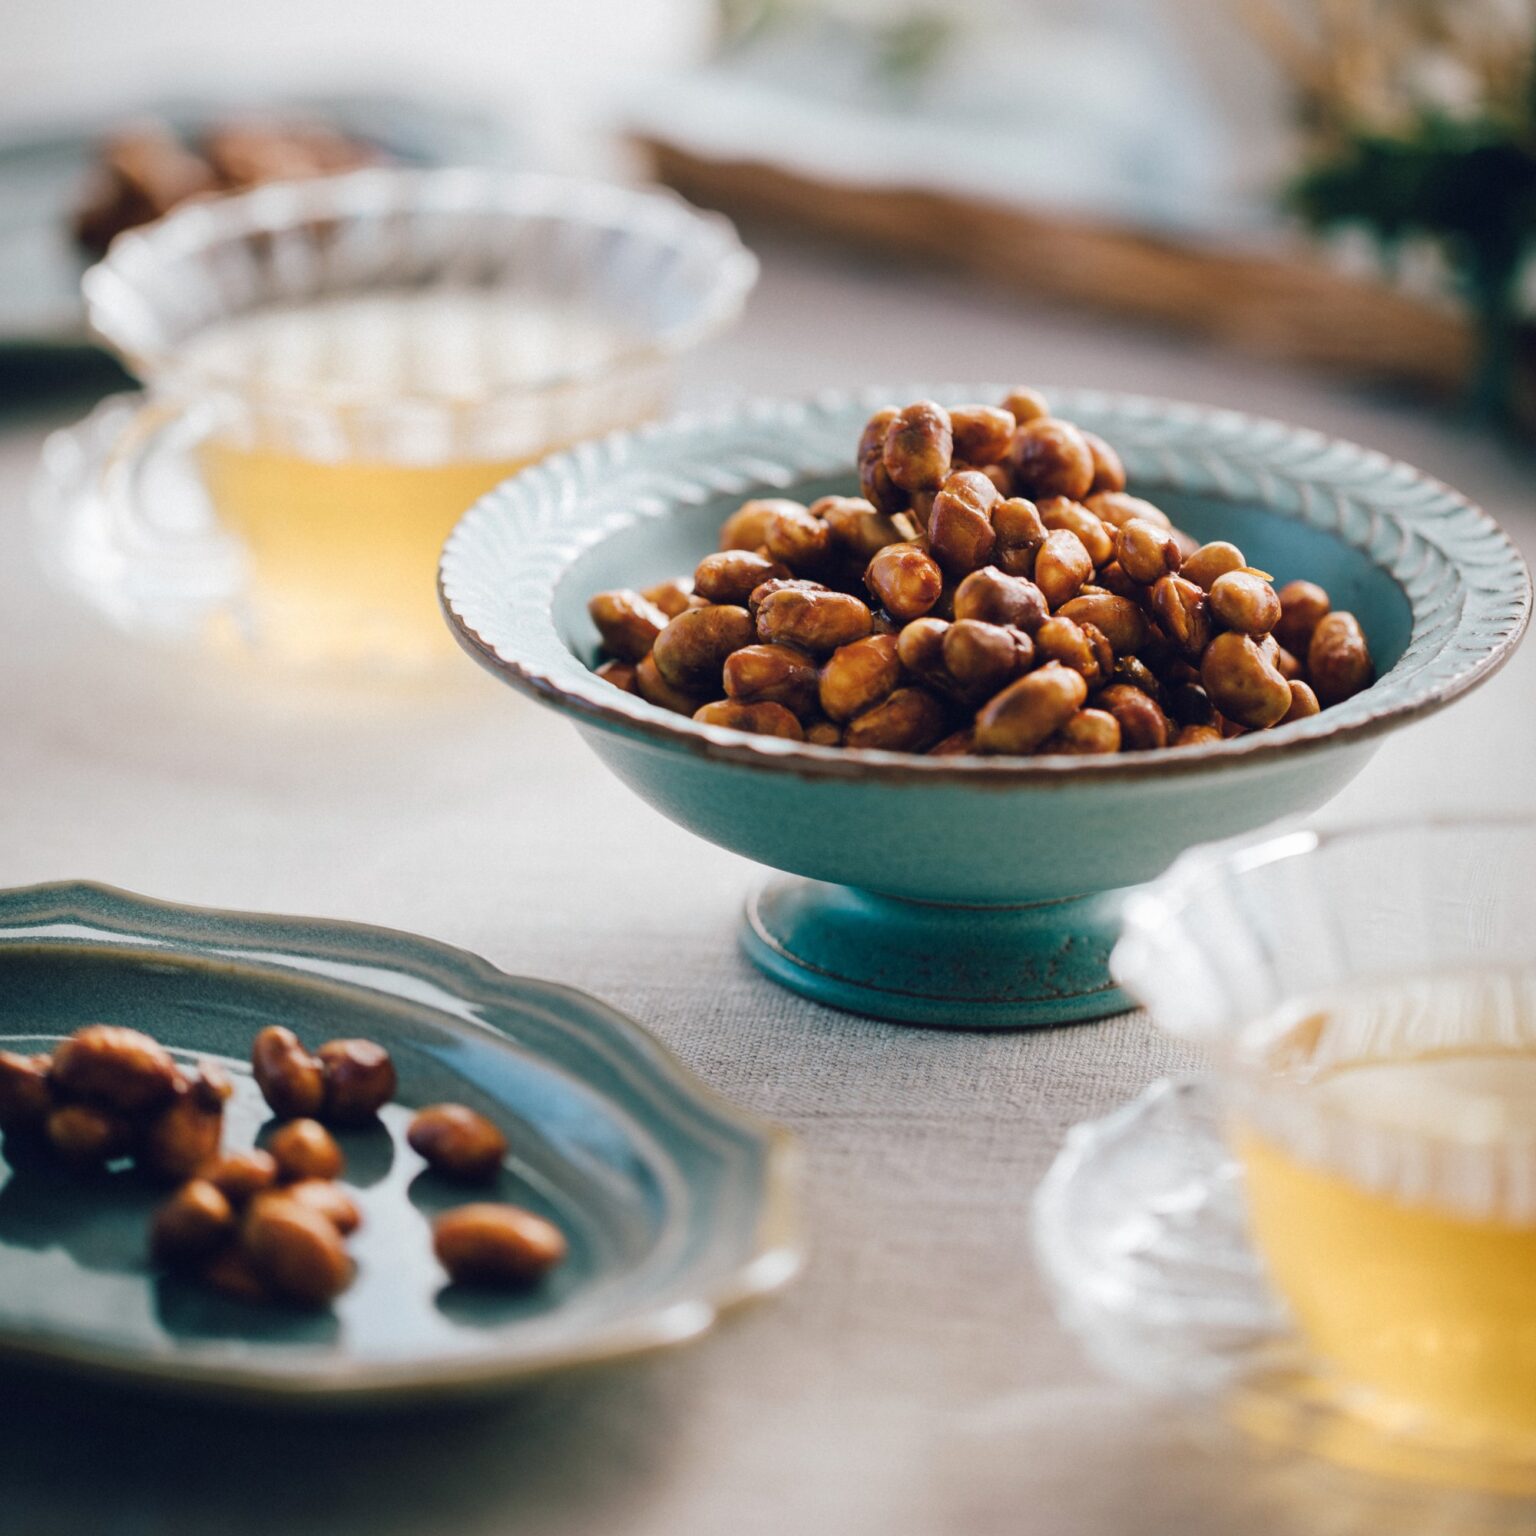 Miso-dressed Caramelized Roasted Soybeans